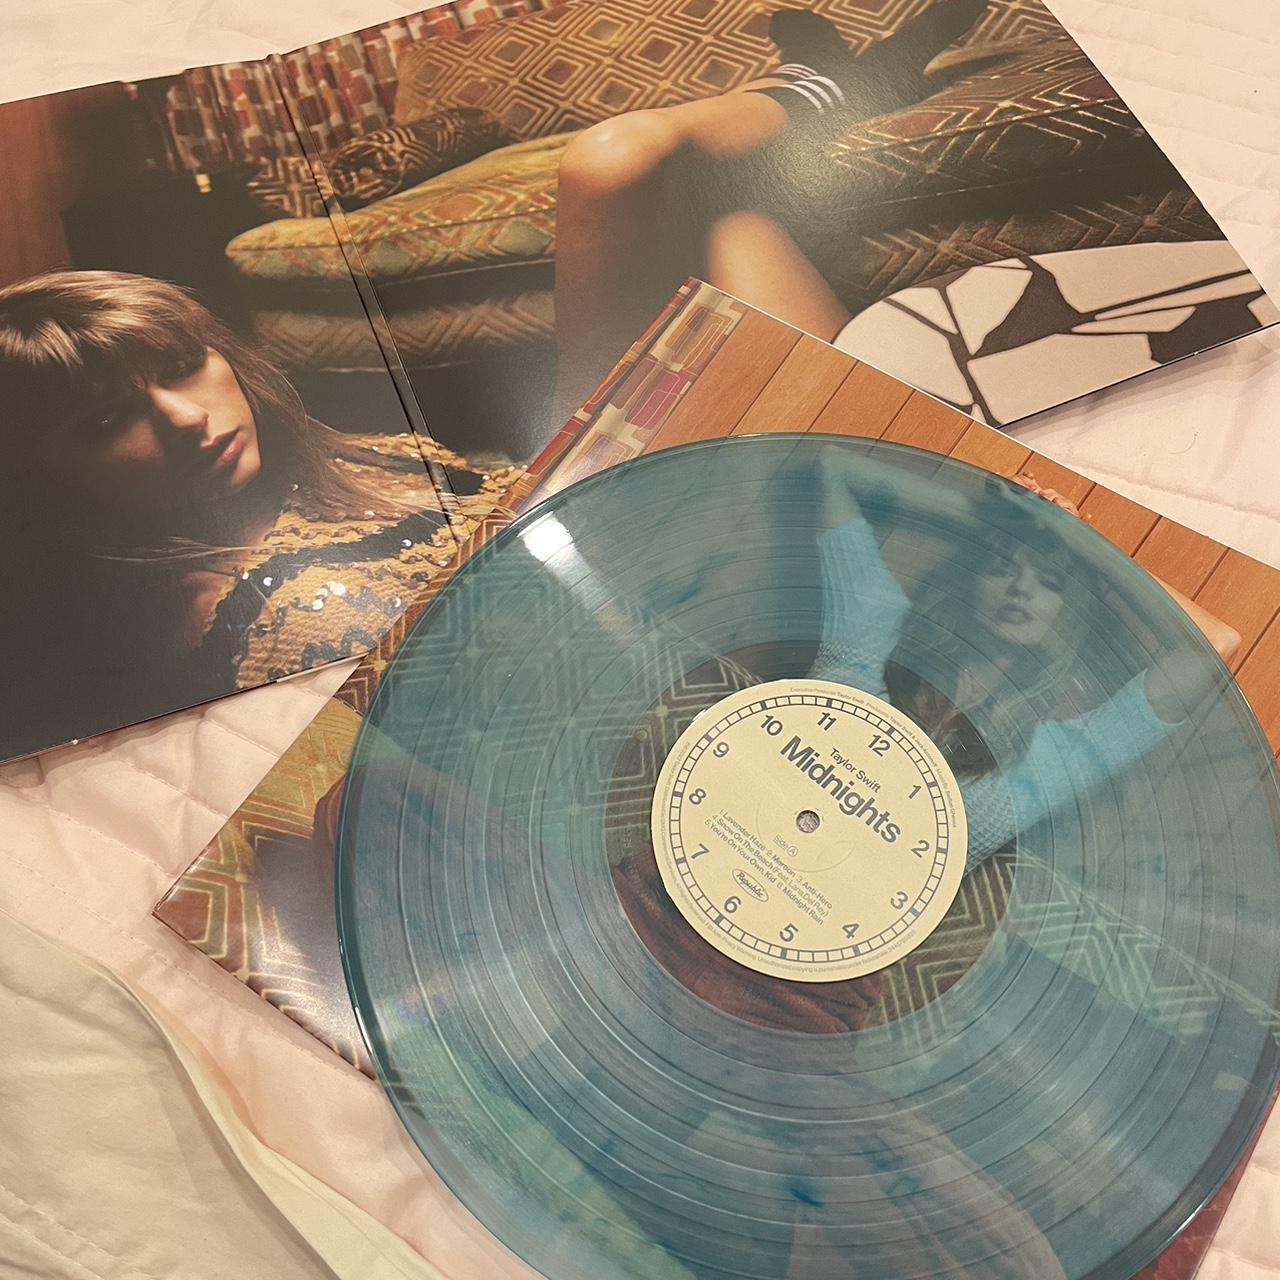 taylor swift 2-lp lover vinyl🎀 baby blue and baby - Depop